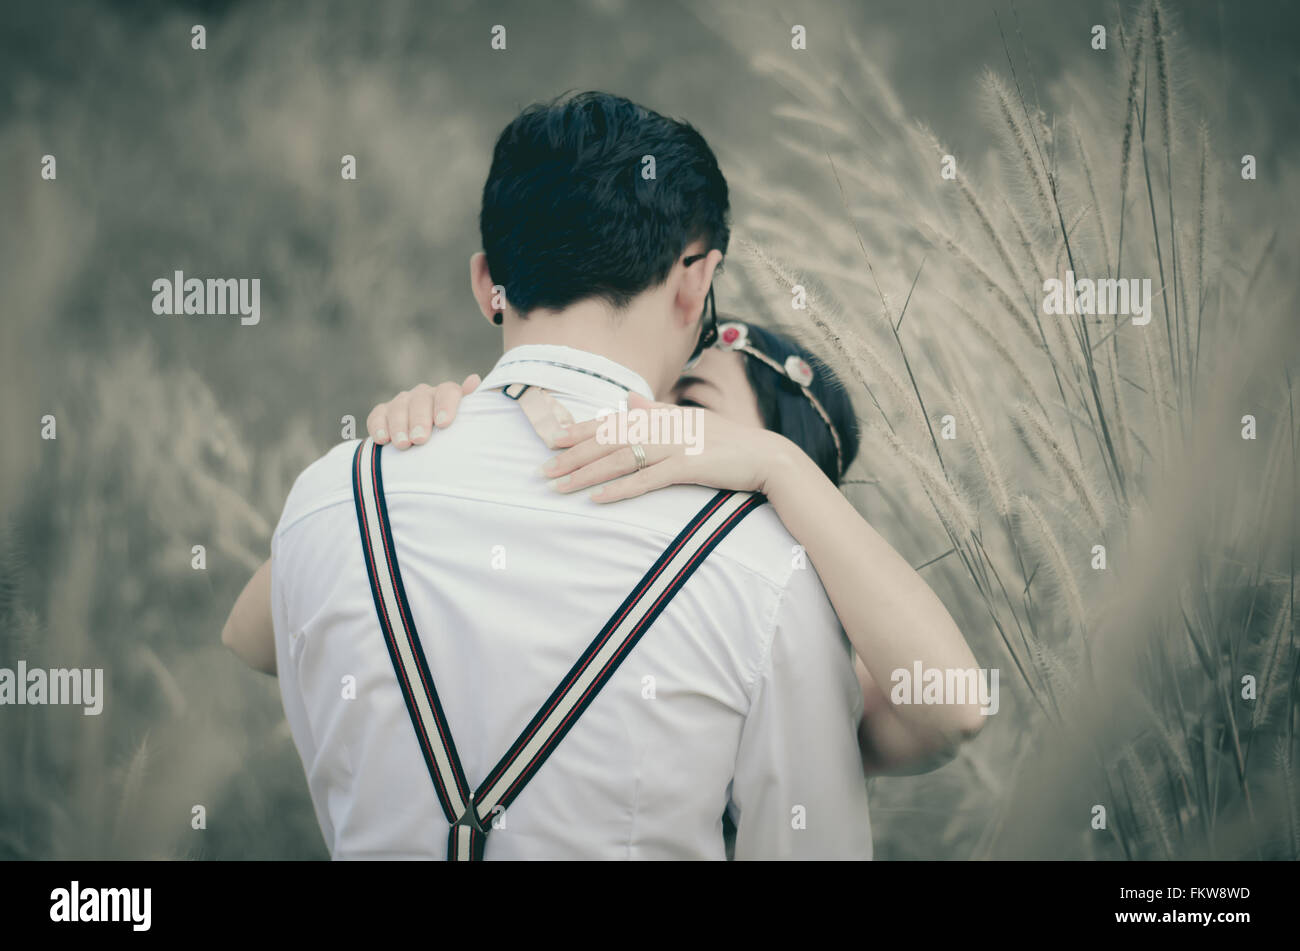 couple kiss and embracing in grass field Stock Photo